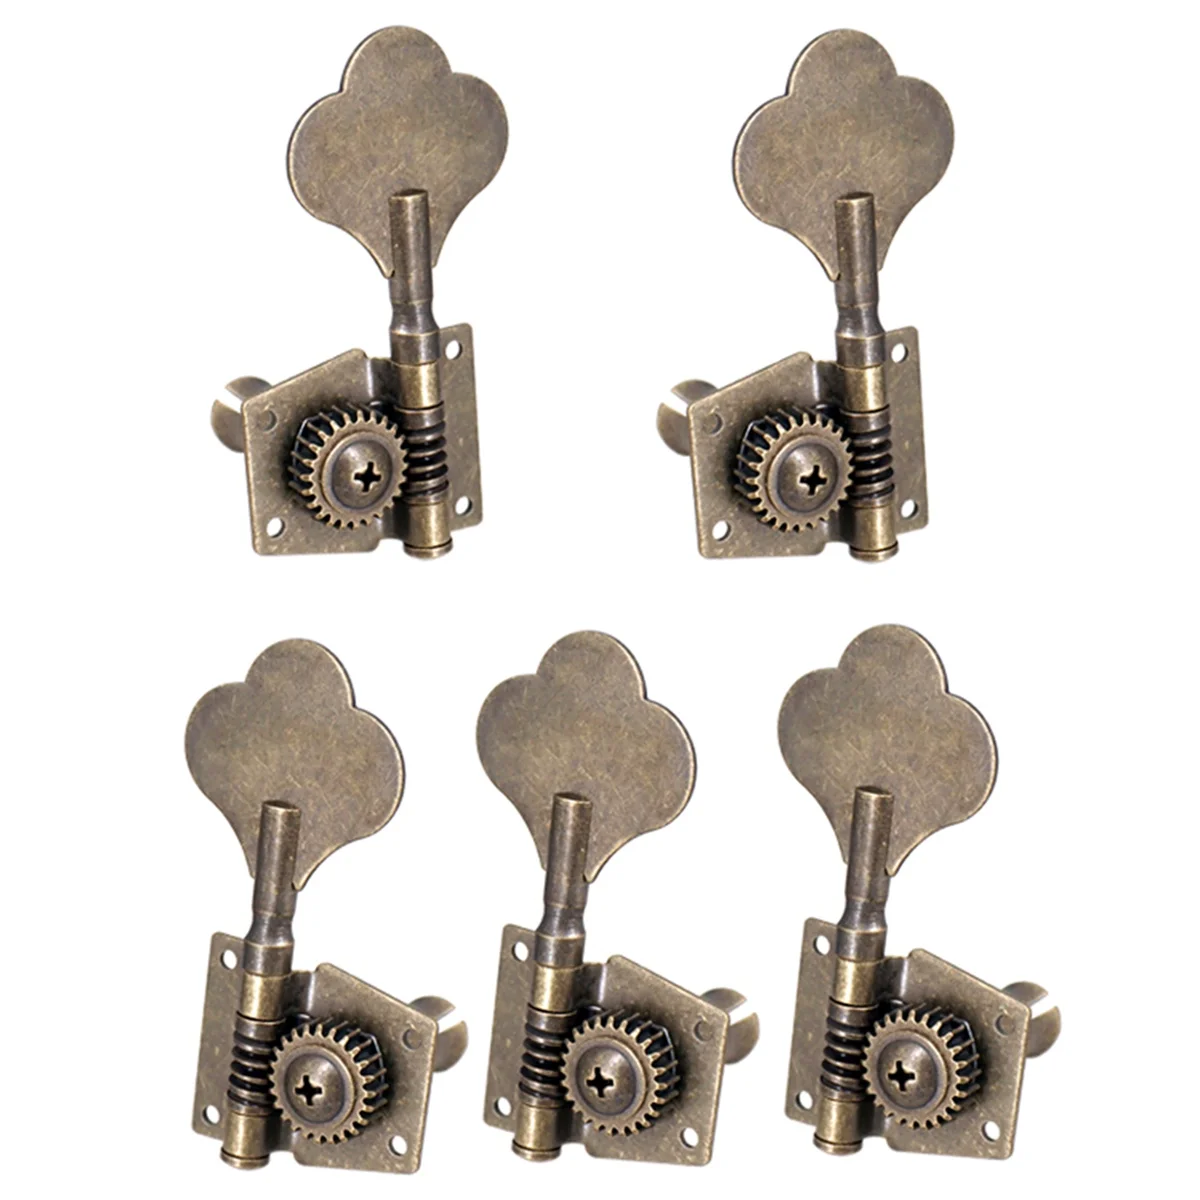 

5Pcs Guitar Vintage Open Bass Guitar Tuning Key Pegs Machine Heads Tuners 2L3R for 5 Strings Bass Bronze